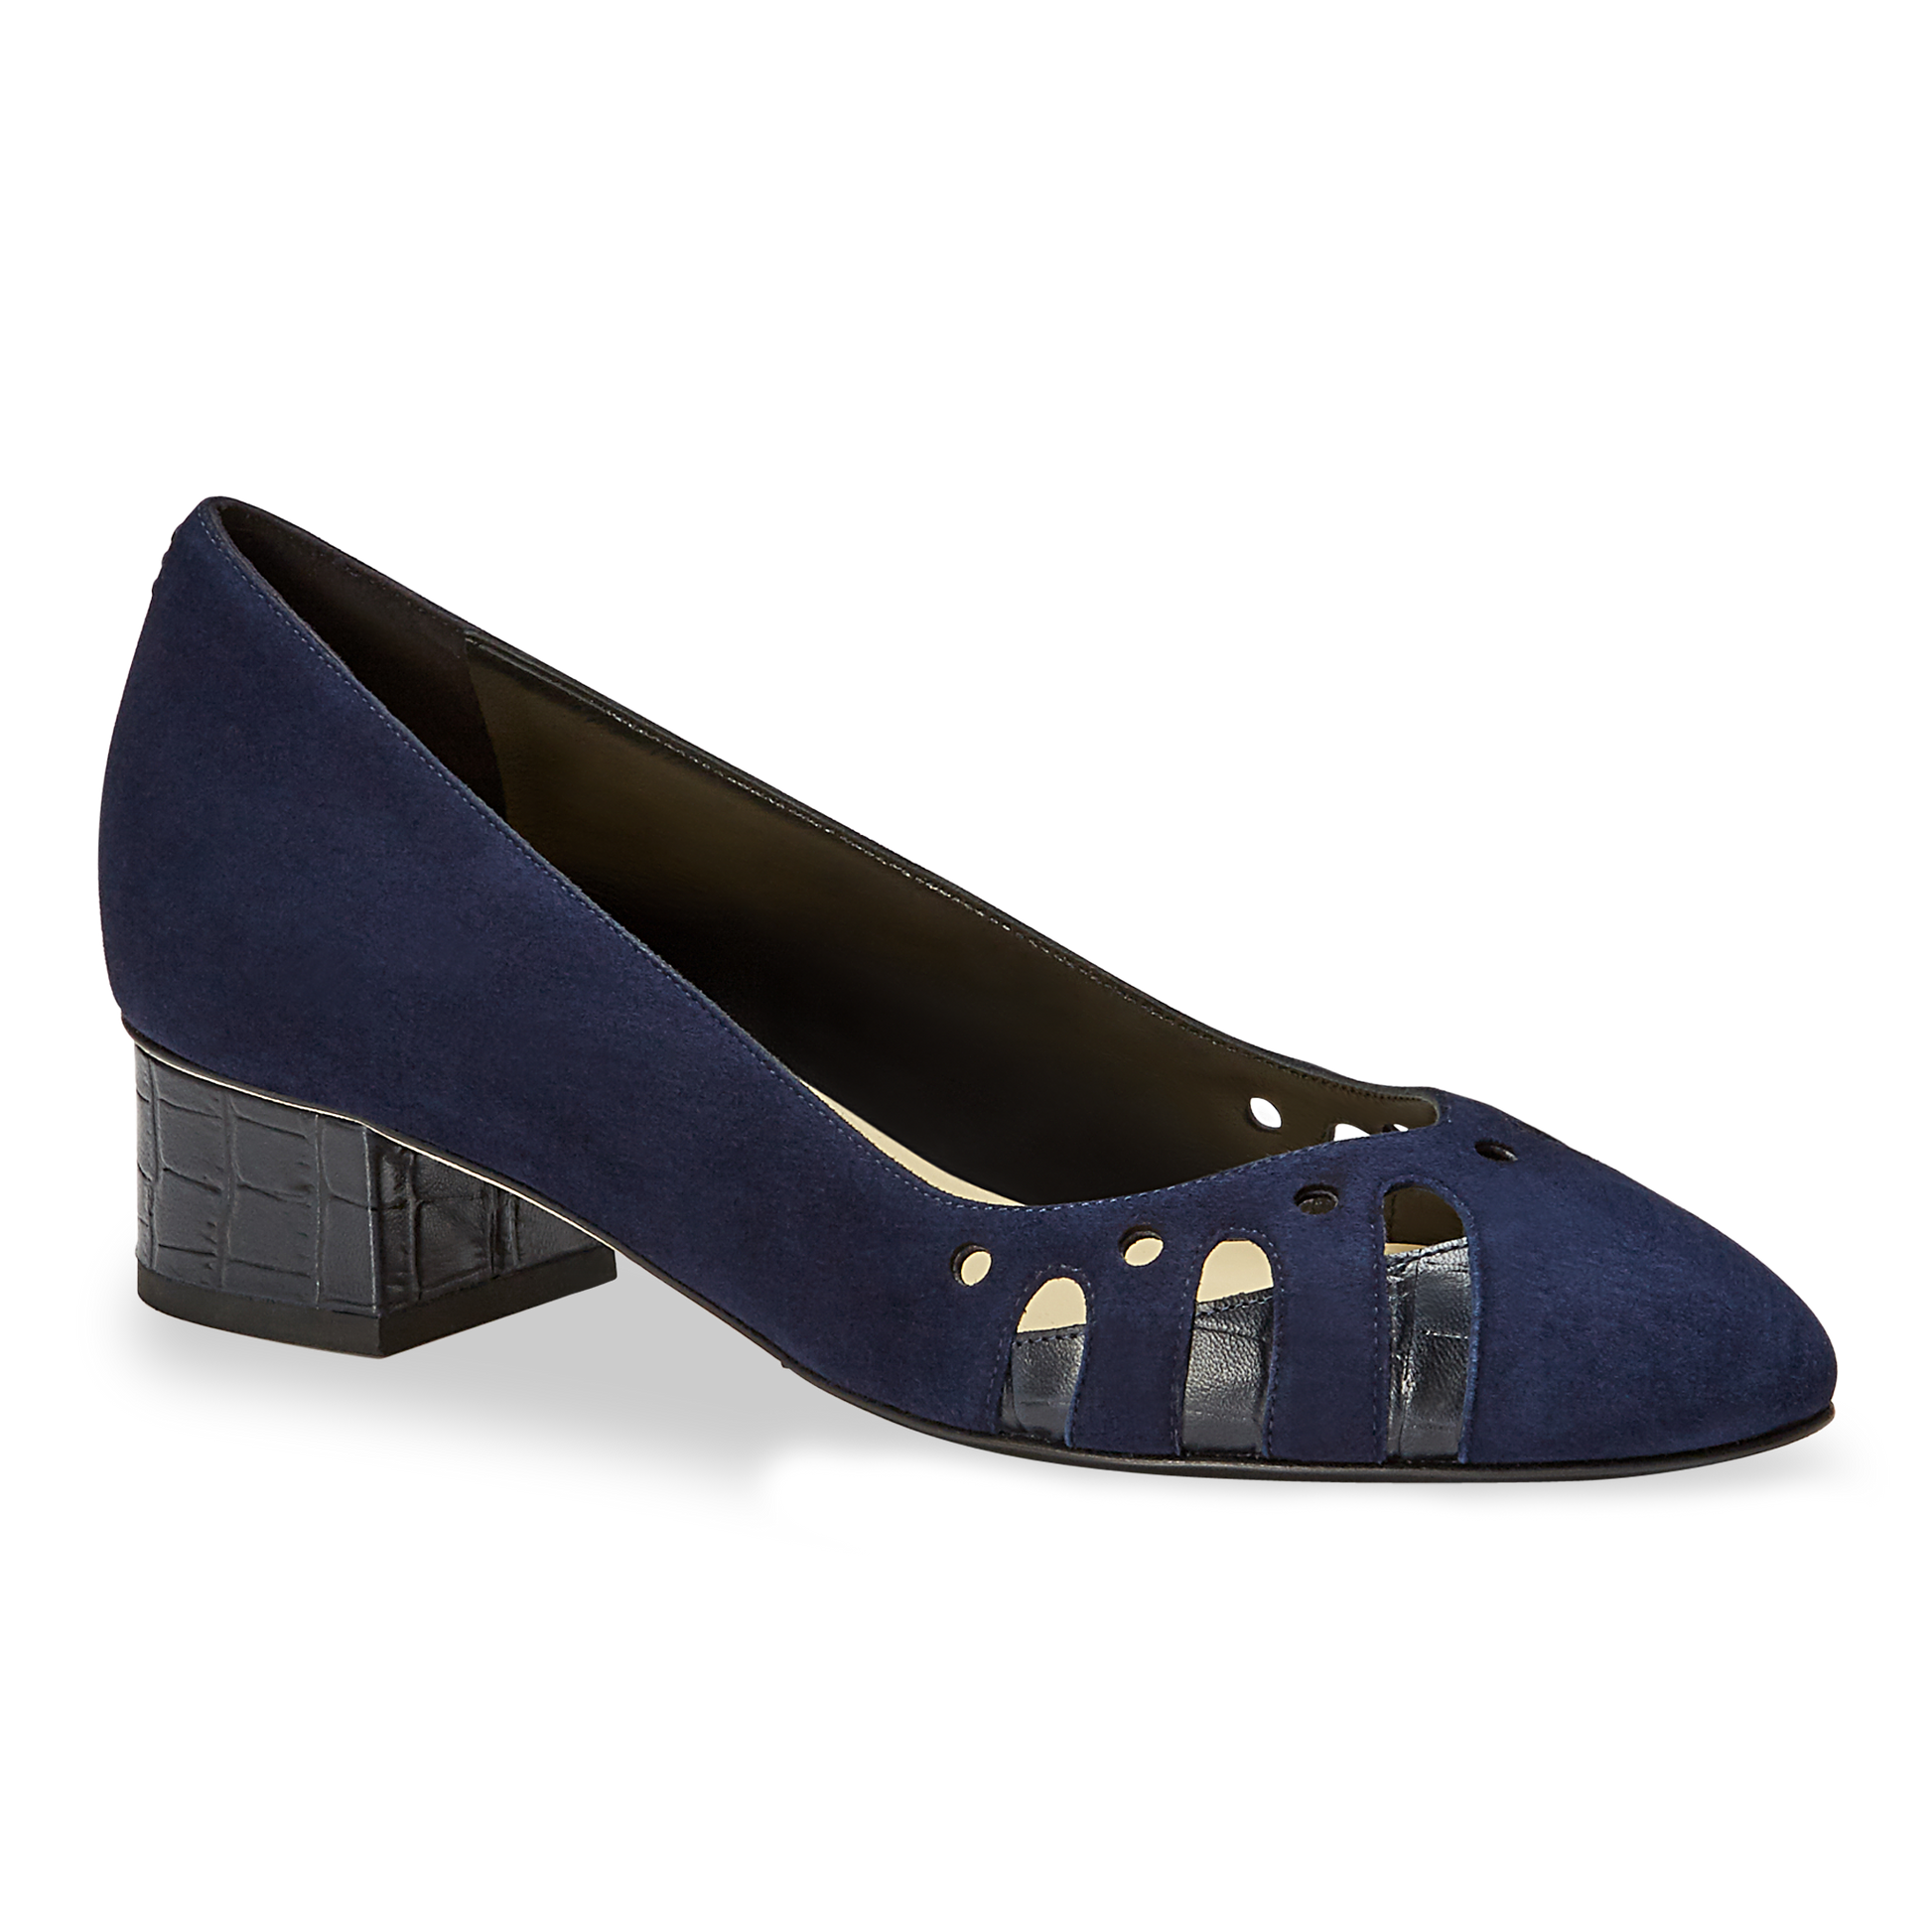 30mm Italian Made Shellie Round Toe Pump in Navy Suede